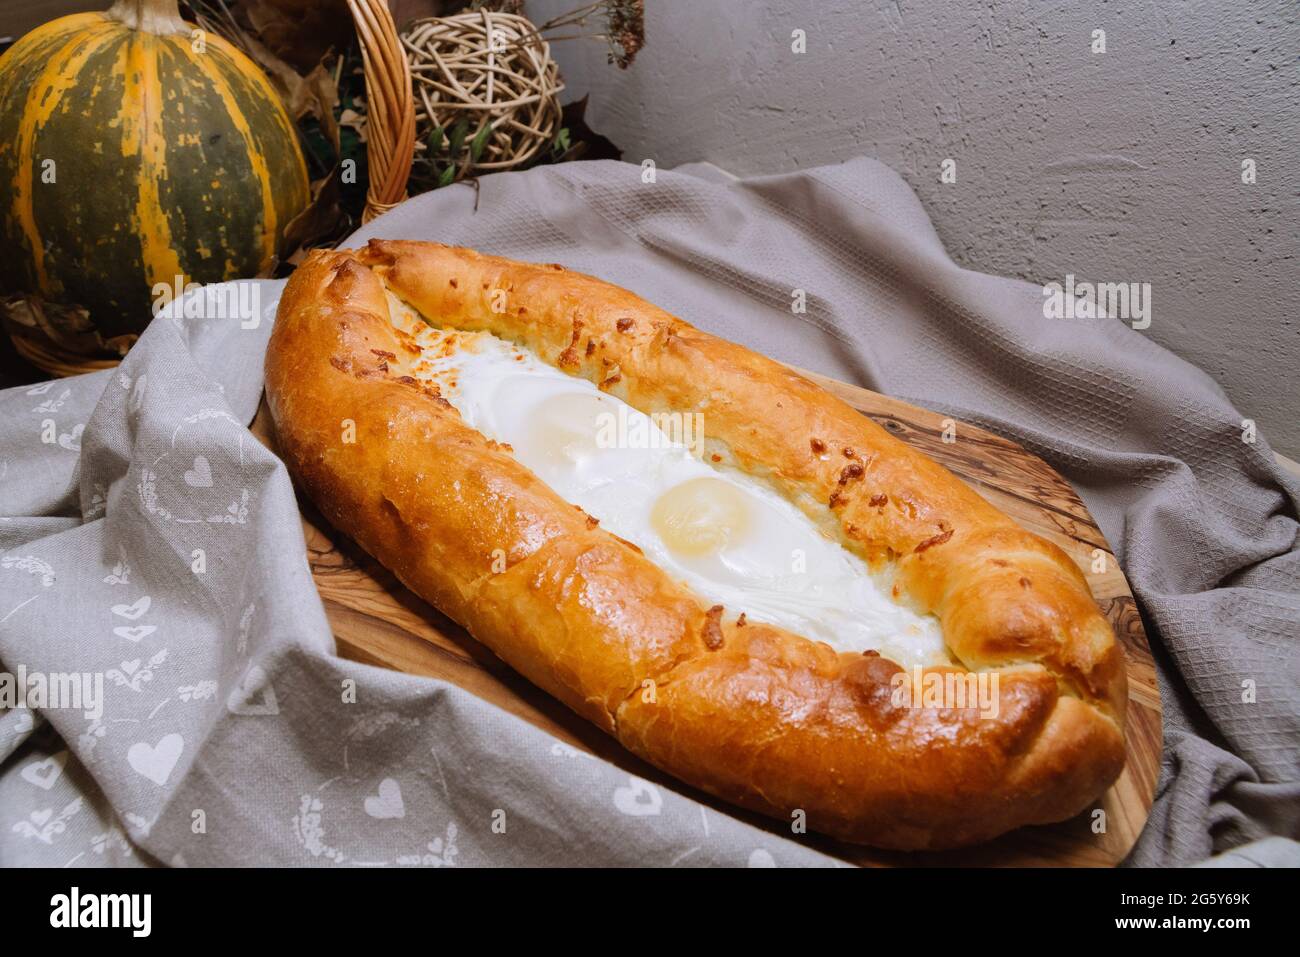 Baked Adjarian-style hot khachapuri with eggs and melted cheese right from the oven are resting on wooden board with a grey towel to the right Stock Photo